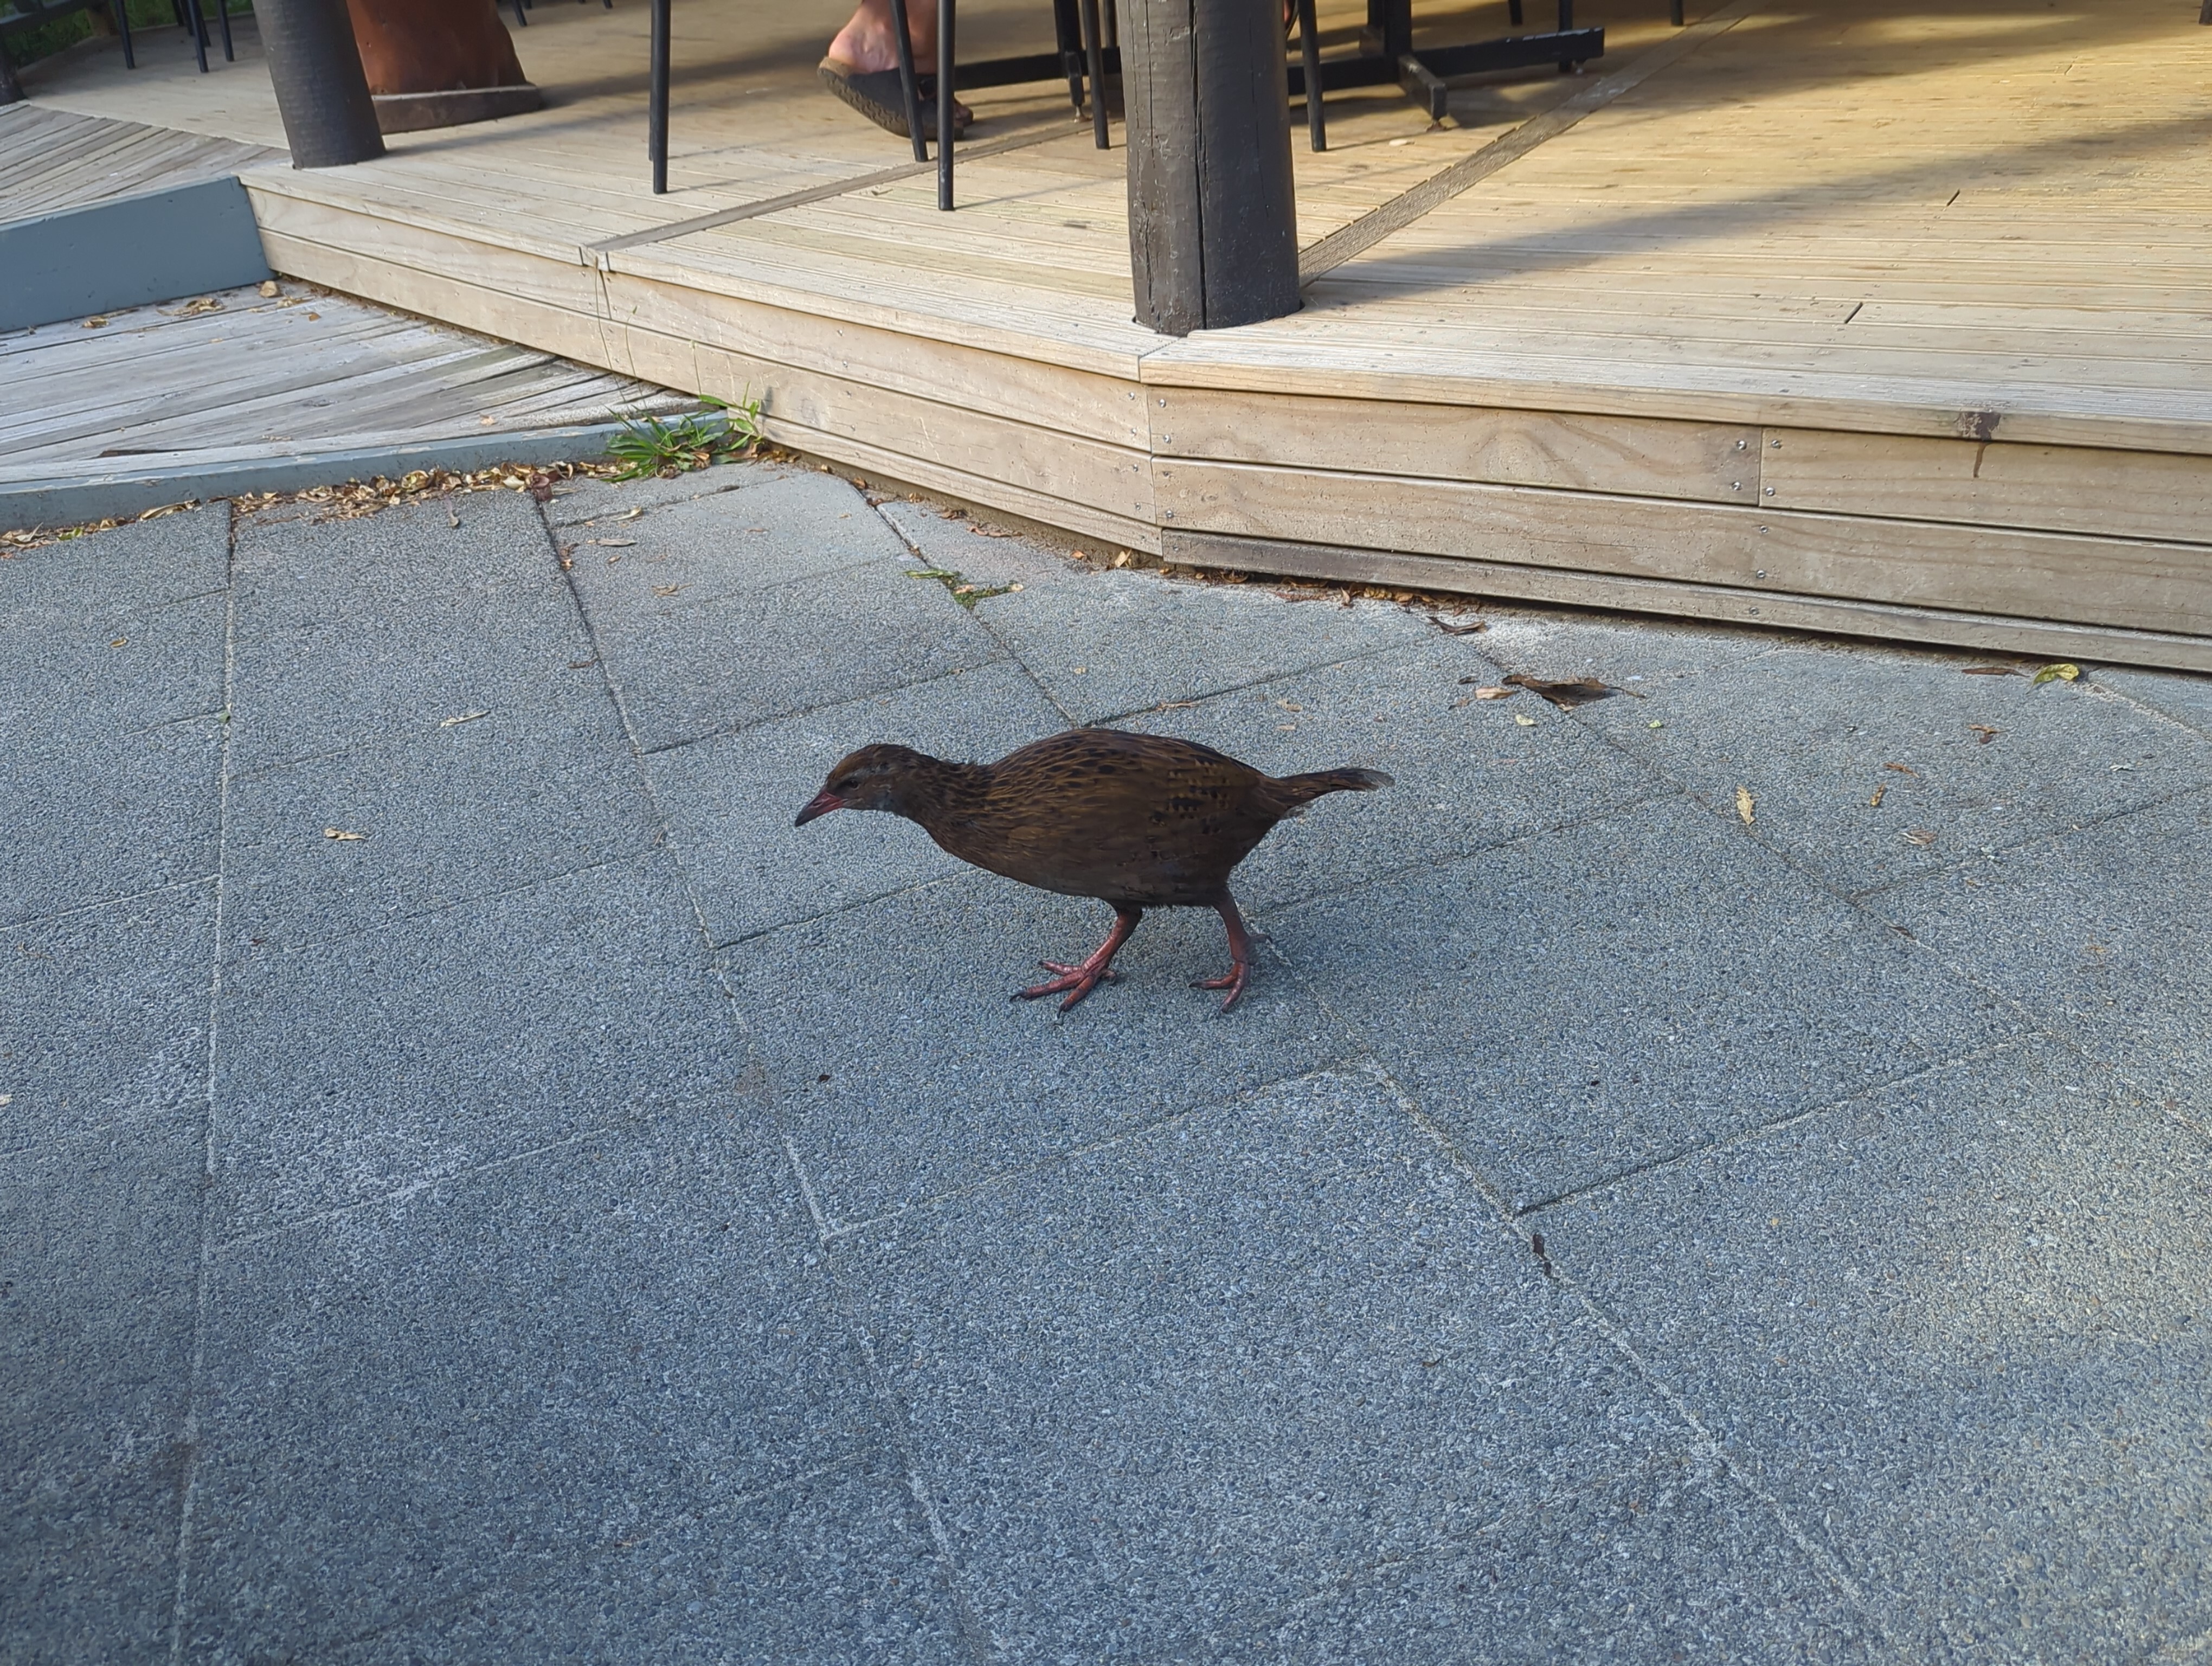 photo of weka on ground in outdoor bar